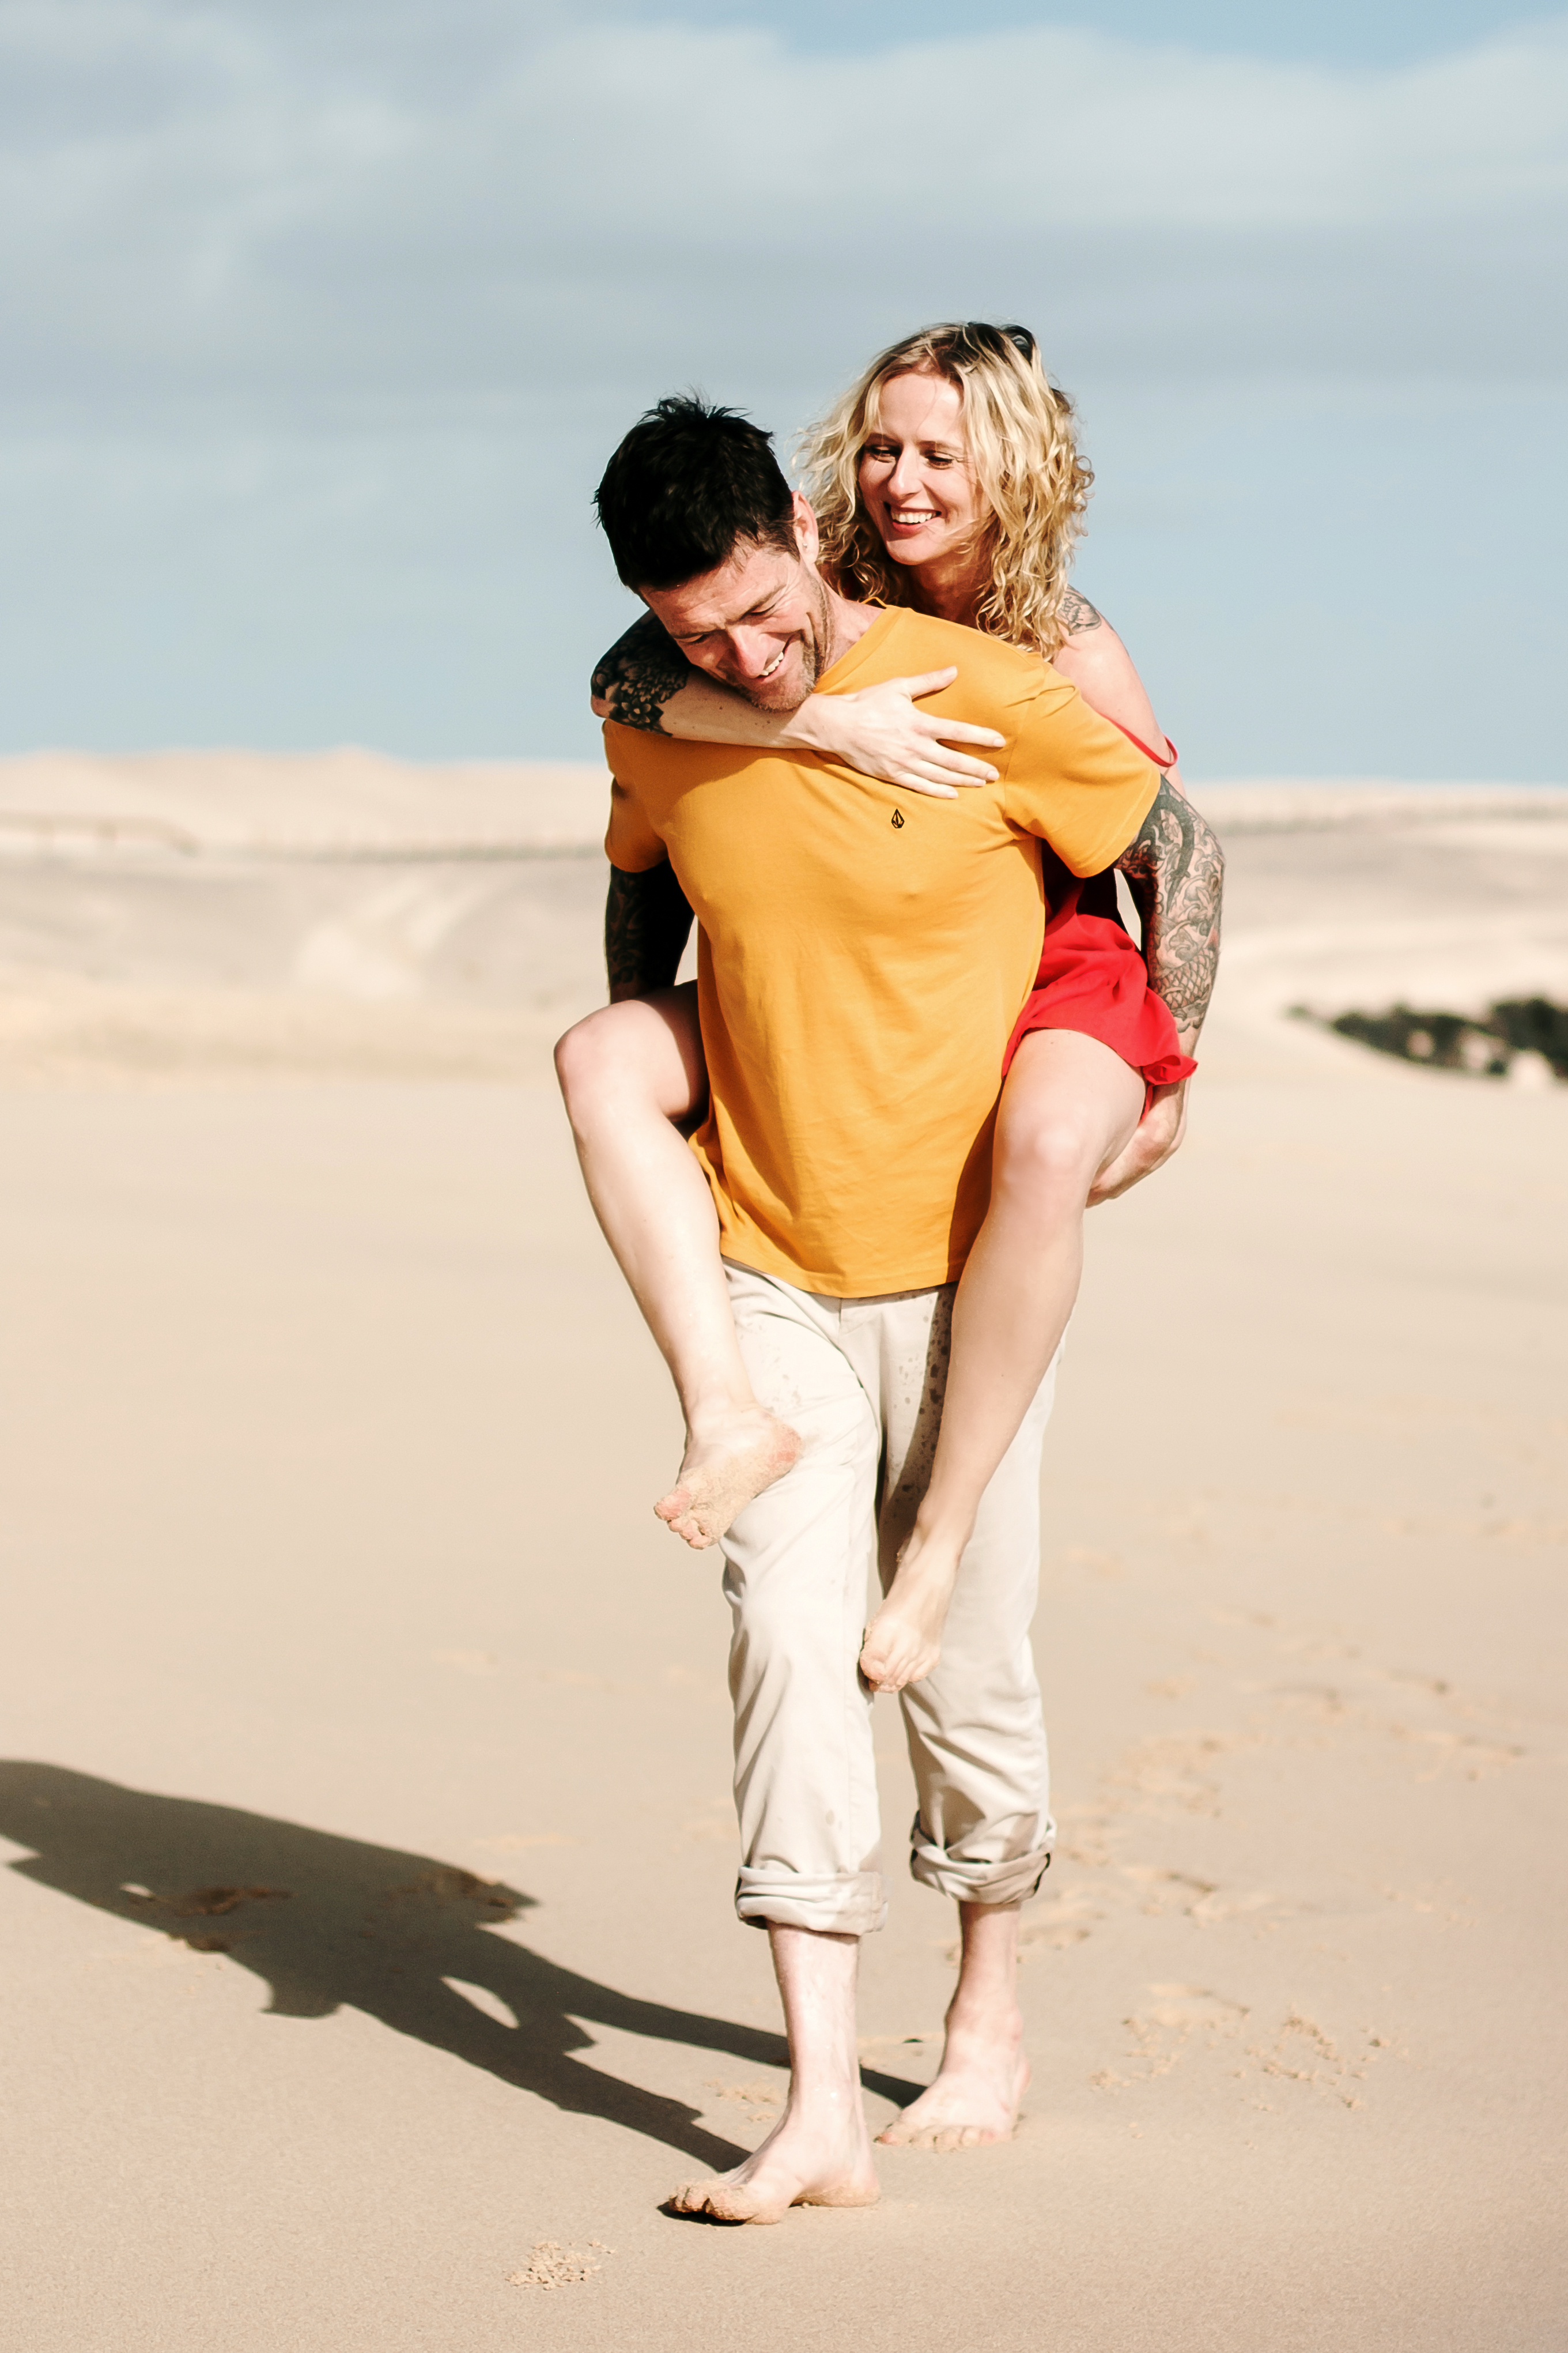 Fuerteventura beach photo shoot: Couple captured in stunning morning photo shoot on Grandes Playas - Dunes of Corralejo beach by professional photographer